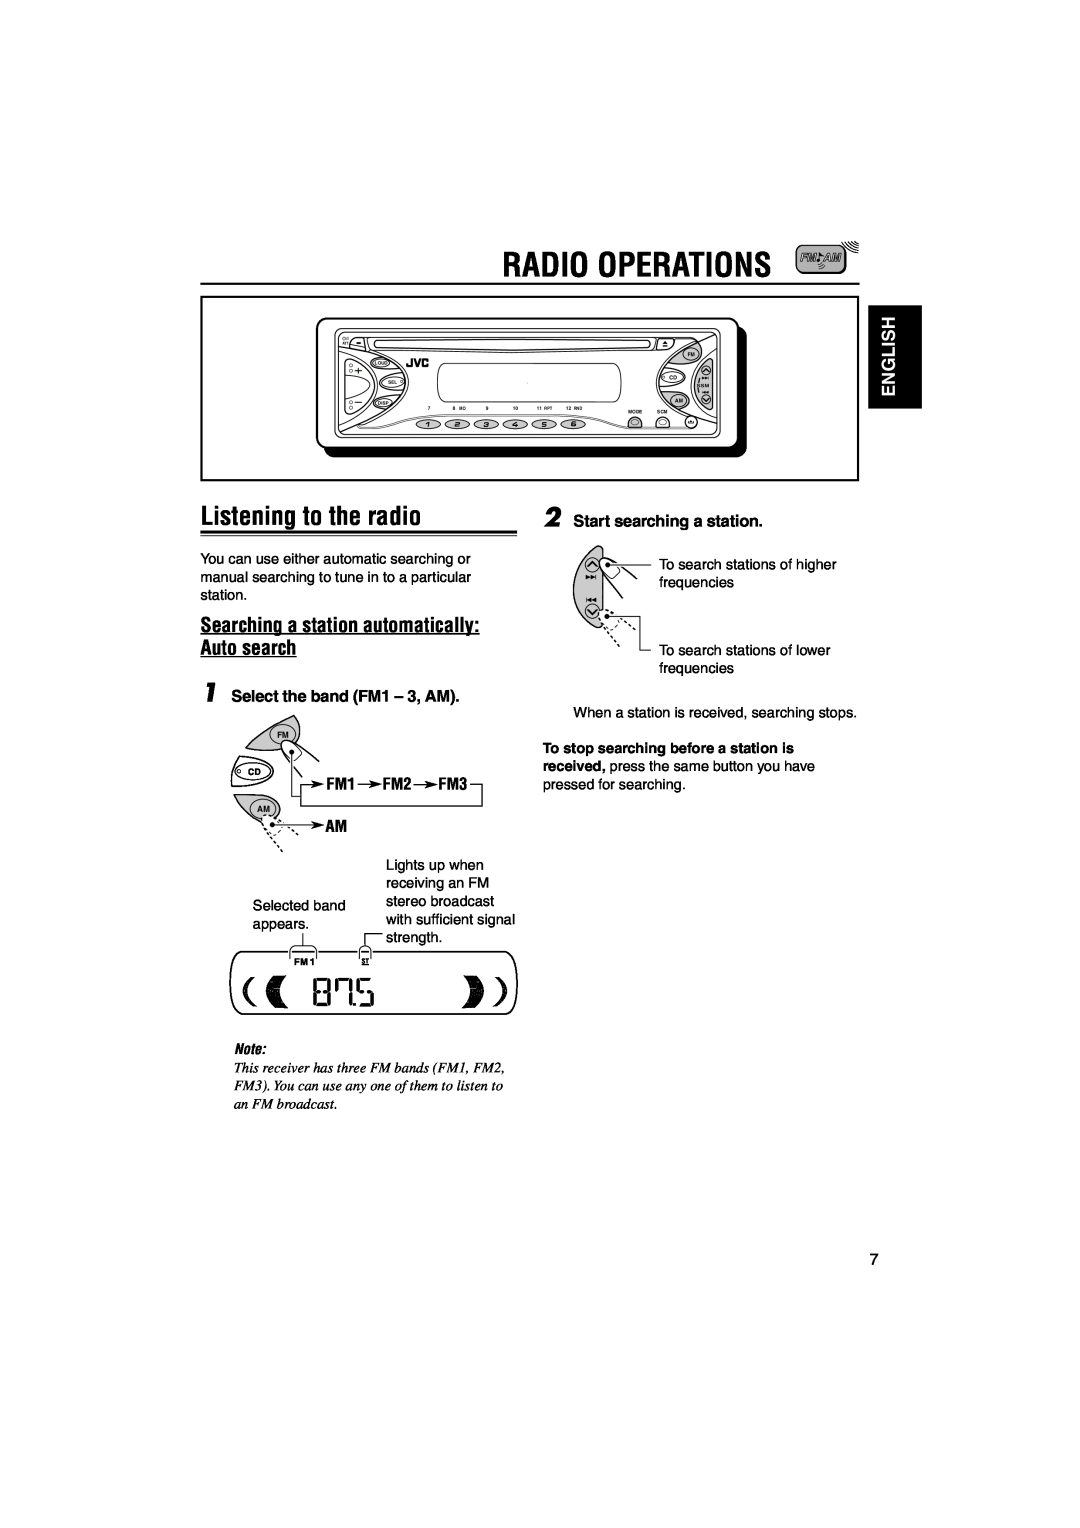 JVC KD-S641 Radio Operations, Listening to the radio, Searching a station automatically Auto search, English, FM1 FM2 FM3 